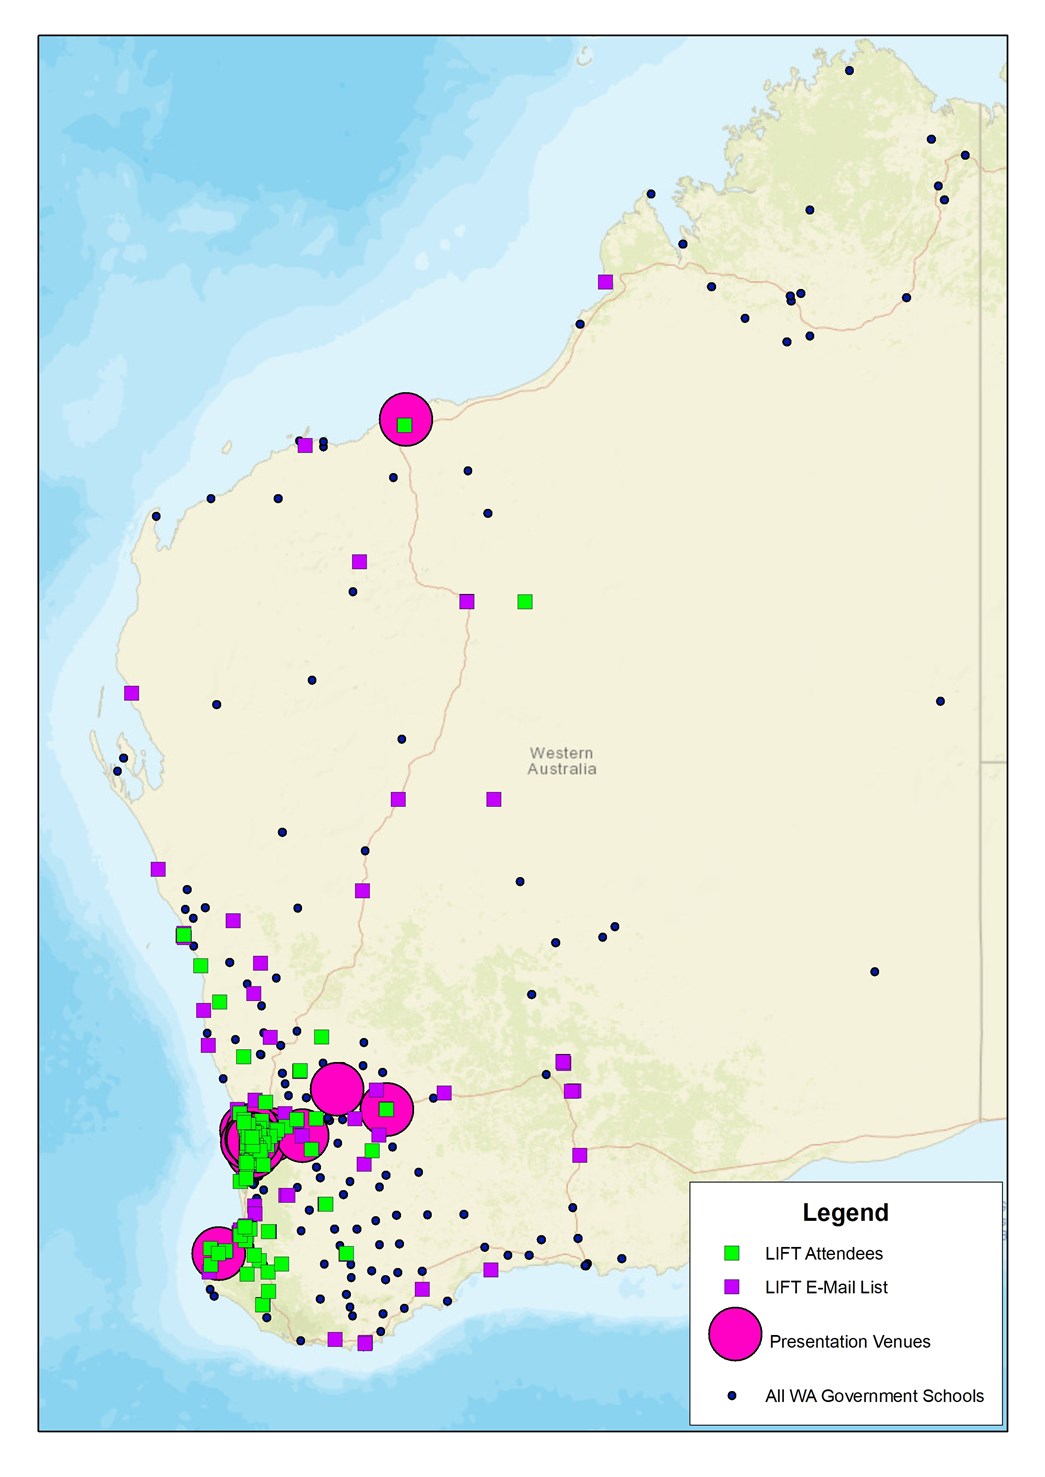 Map of Western Australia which shows the LIFT events attended by Library officers across Western Australia.